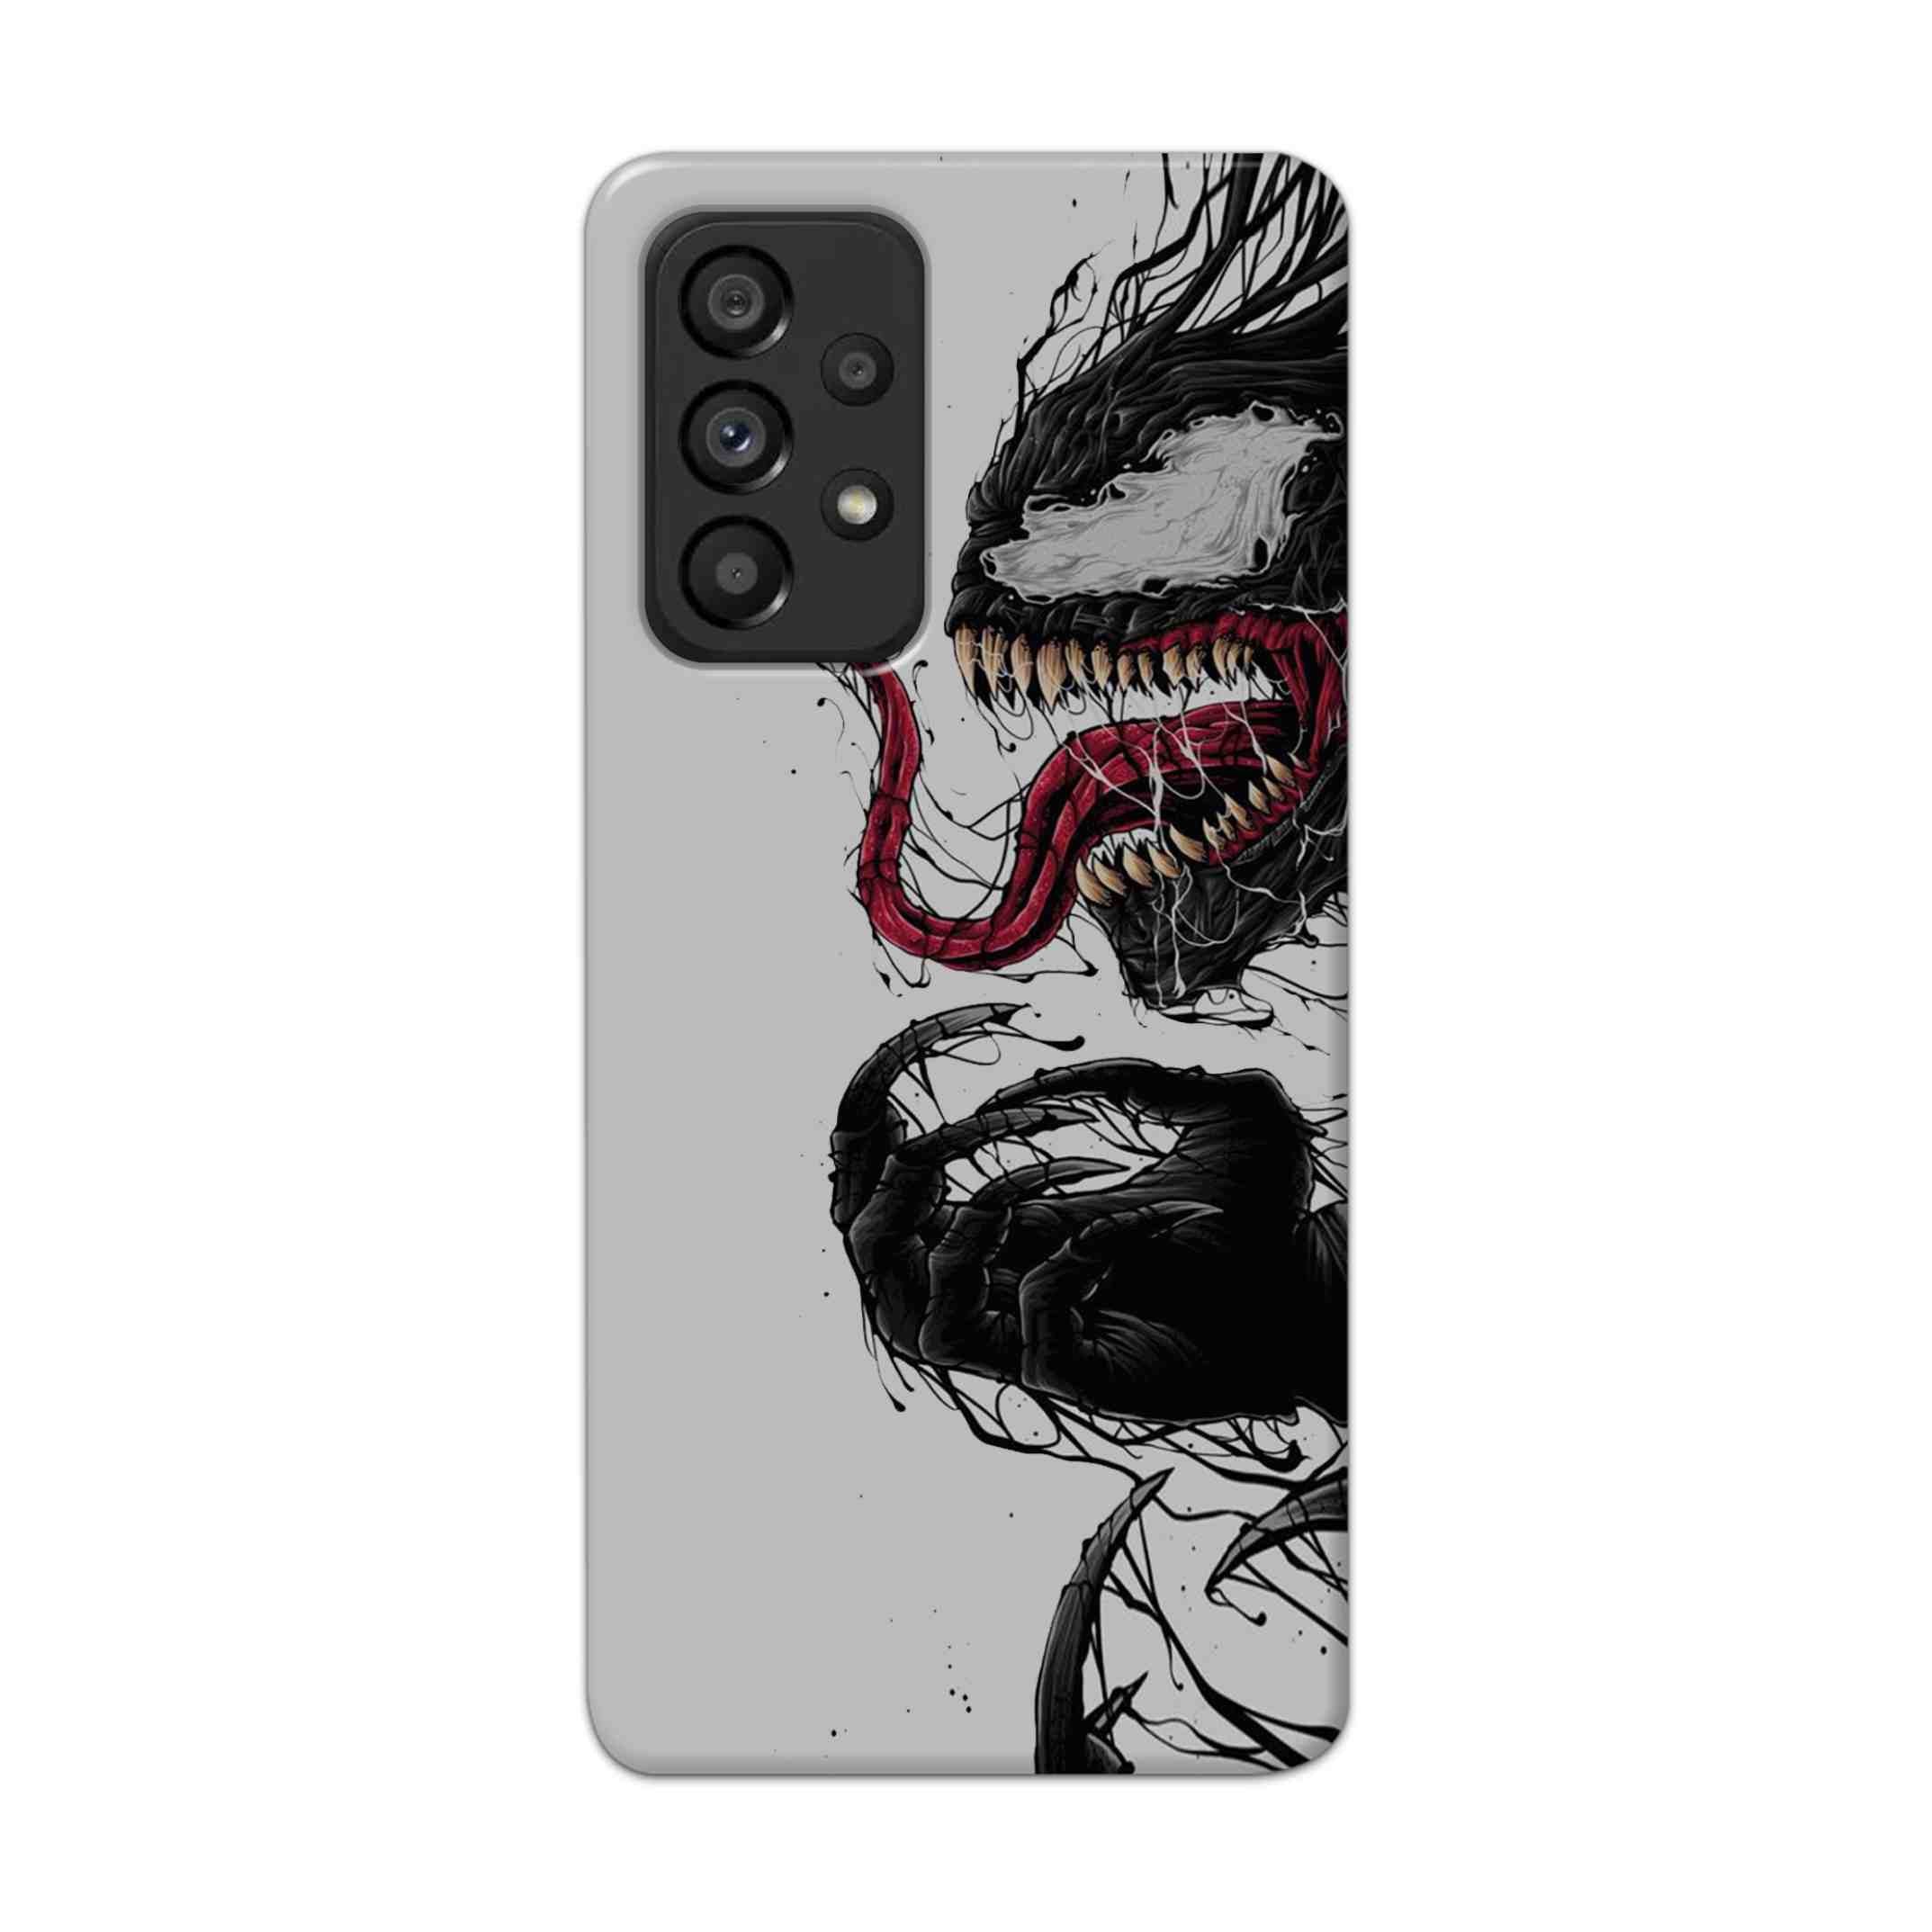 Buy Venom Crazy Hard Back Mobile Phone Case Cover For Samsung Galaxy A53 5G Online